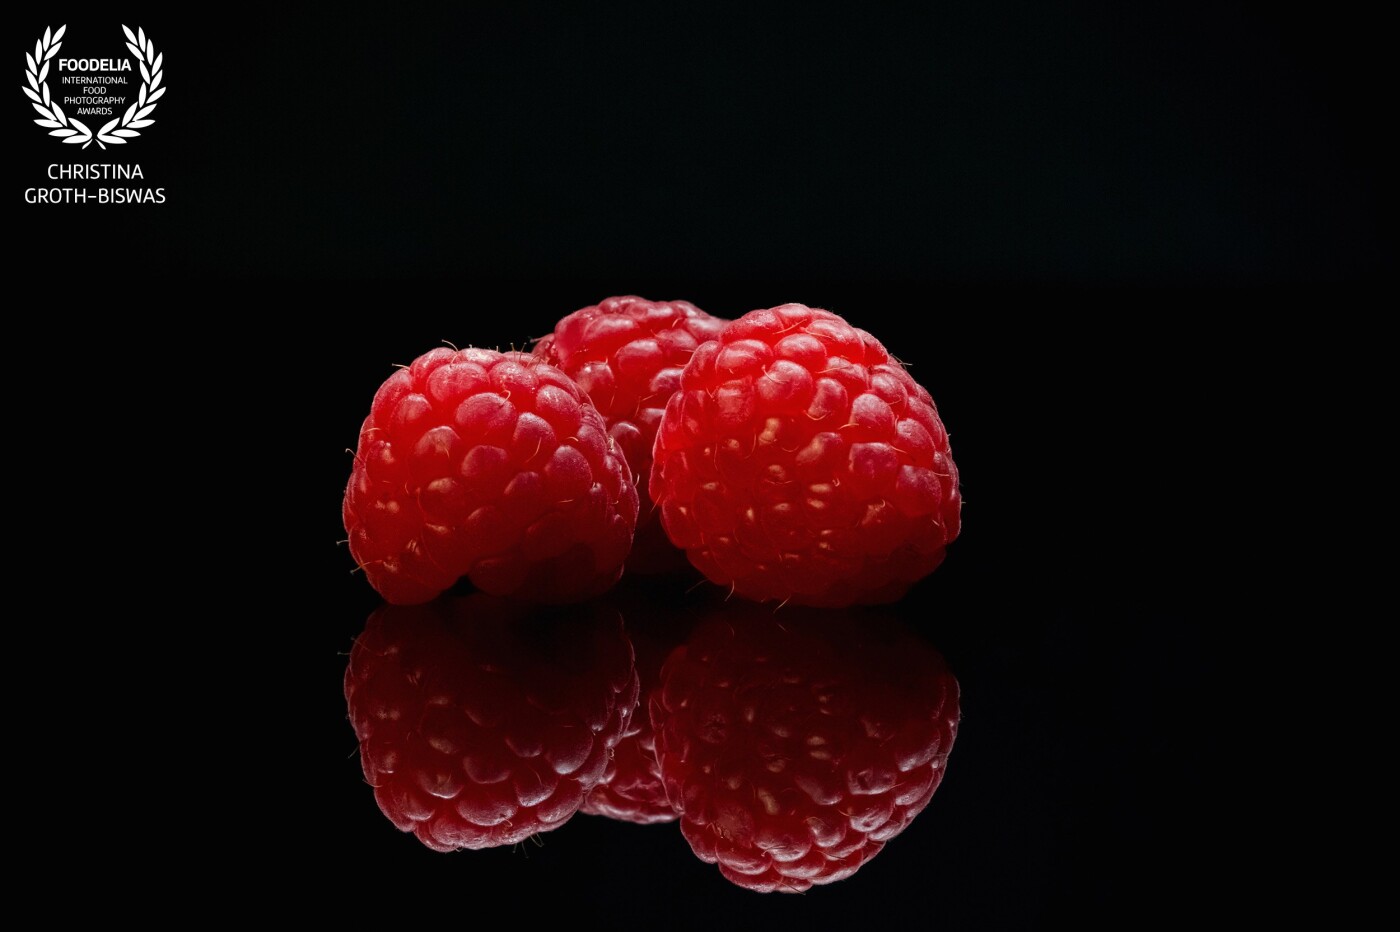 Perfectly ripe raspberries and their reflection on black. I did not use any props as they would have distracted the viewer from the beauty of the subjects.